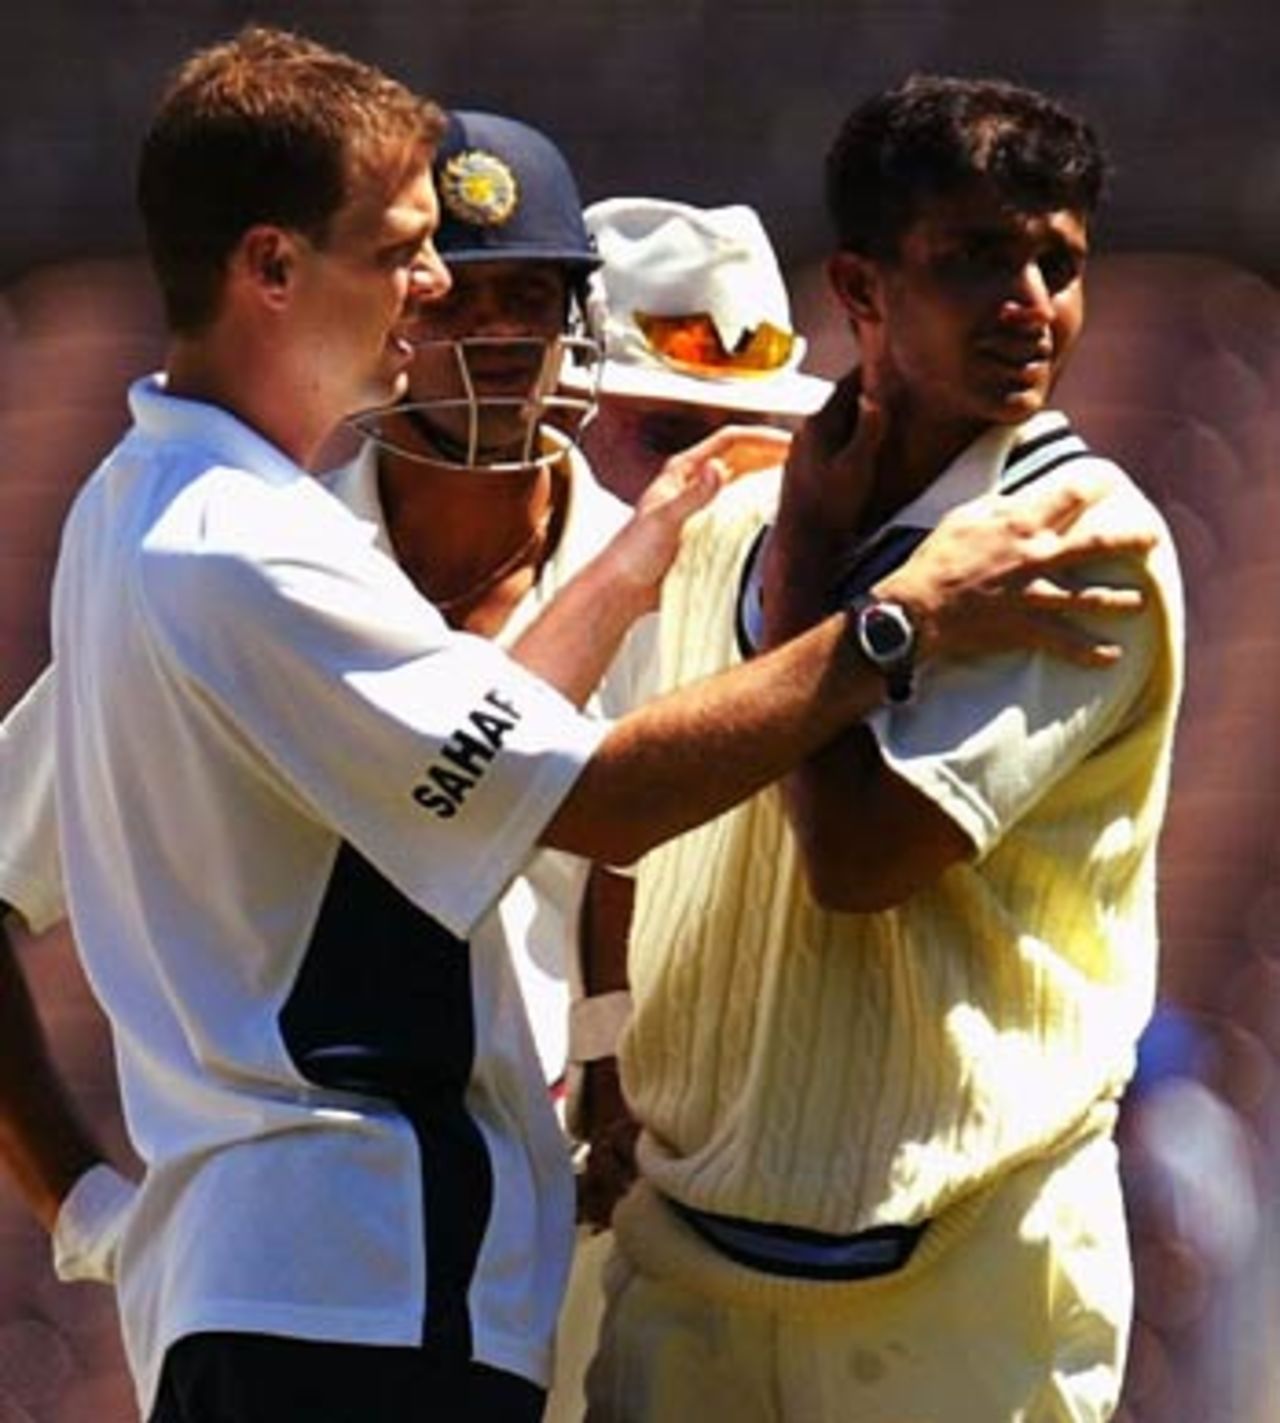 Andrew Leipus had to take a close look at Sourav Ganguly, Australia v India, 3rd Test, Melbourne, 4th day, December 29, 2003